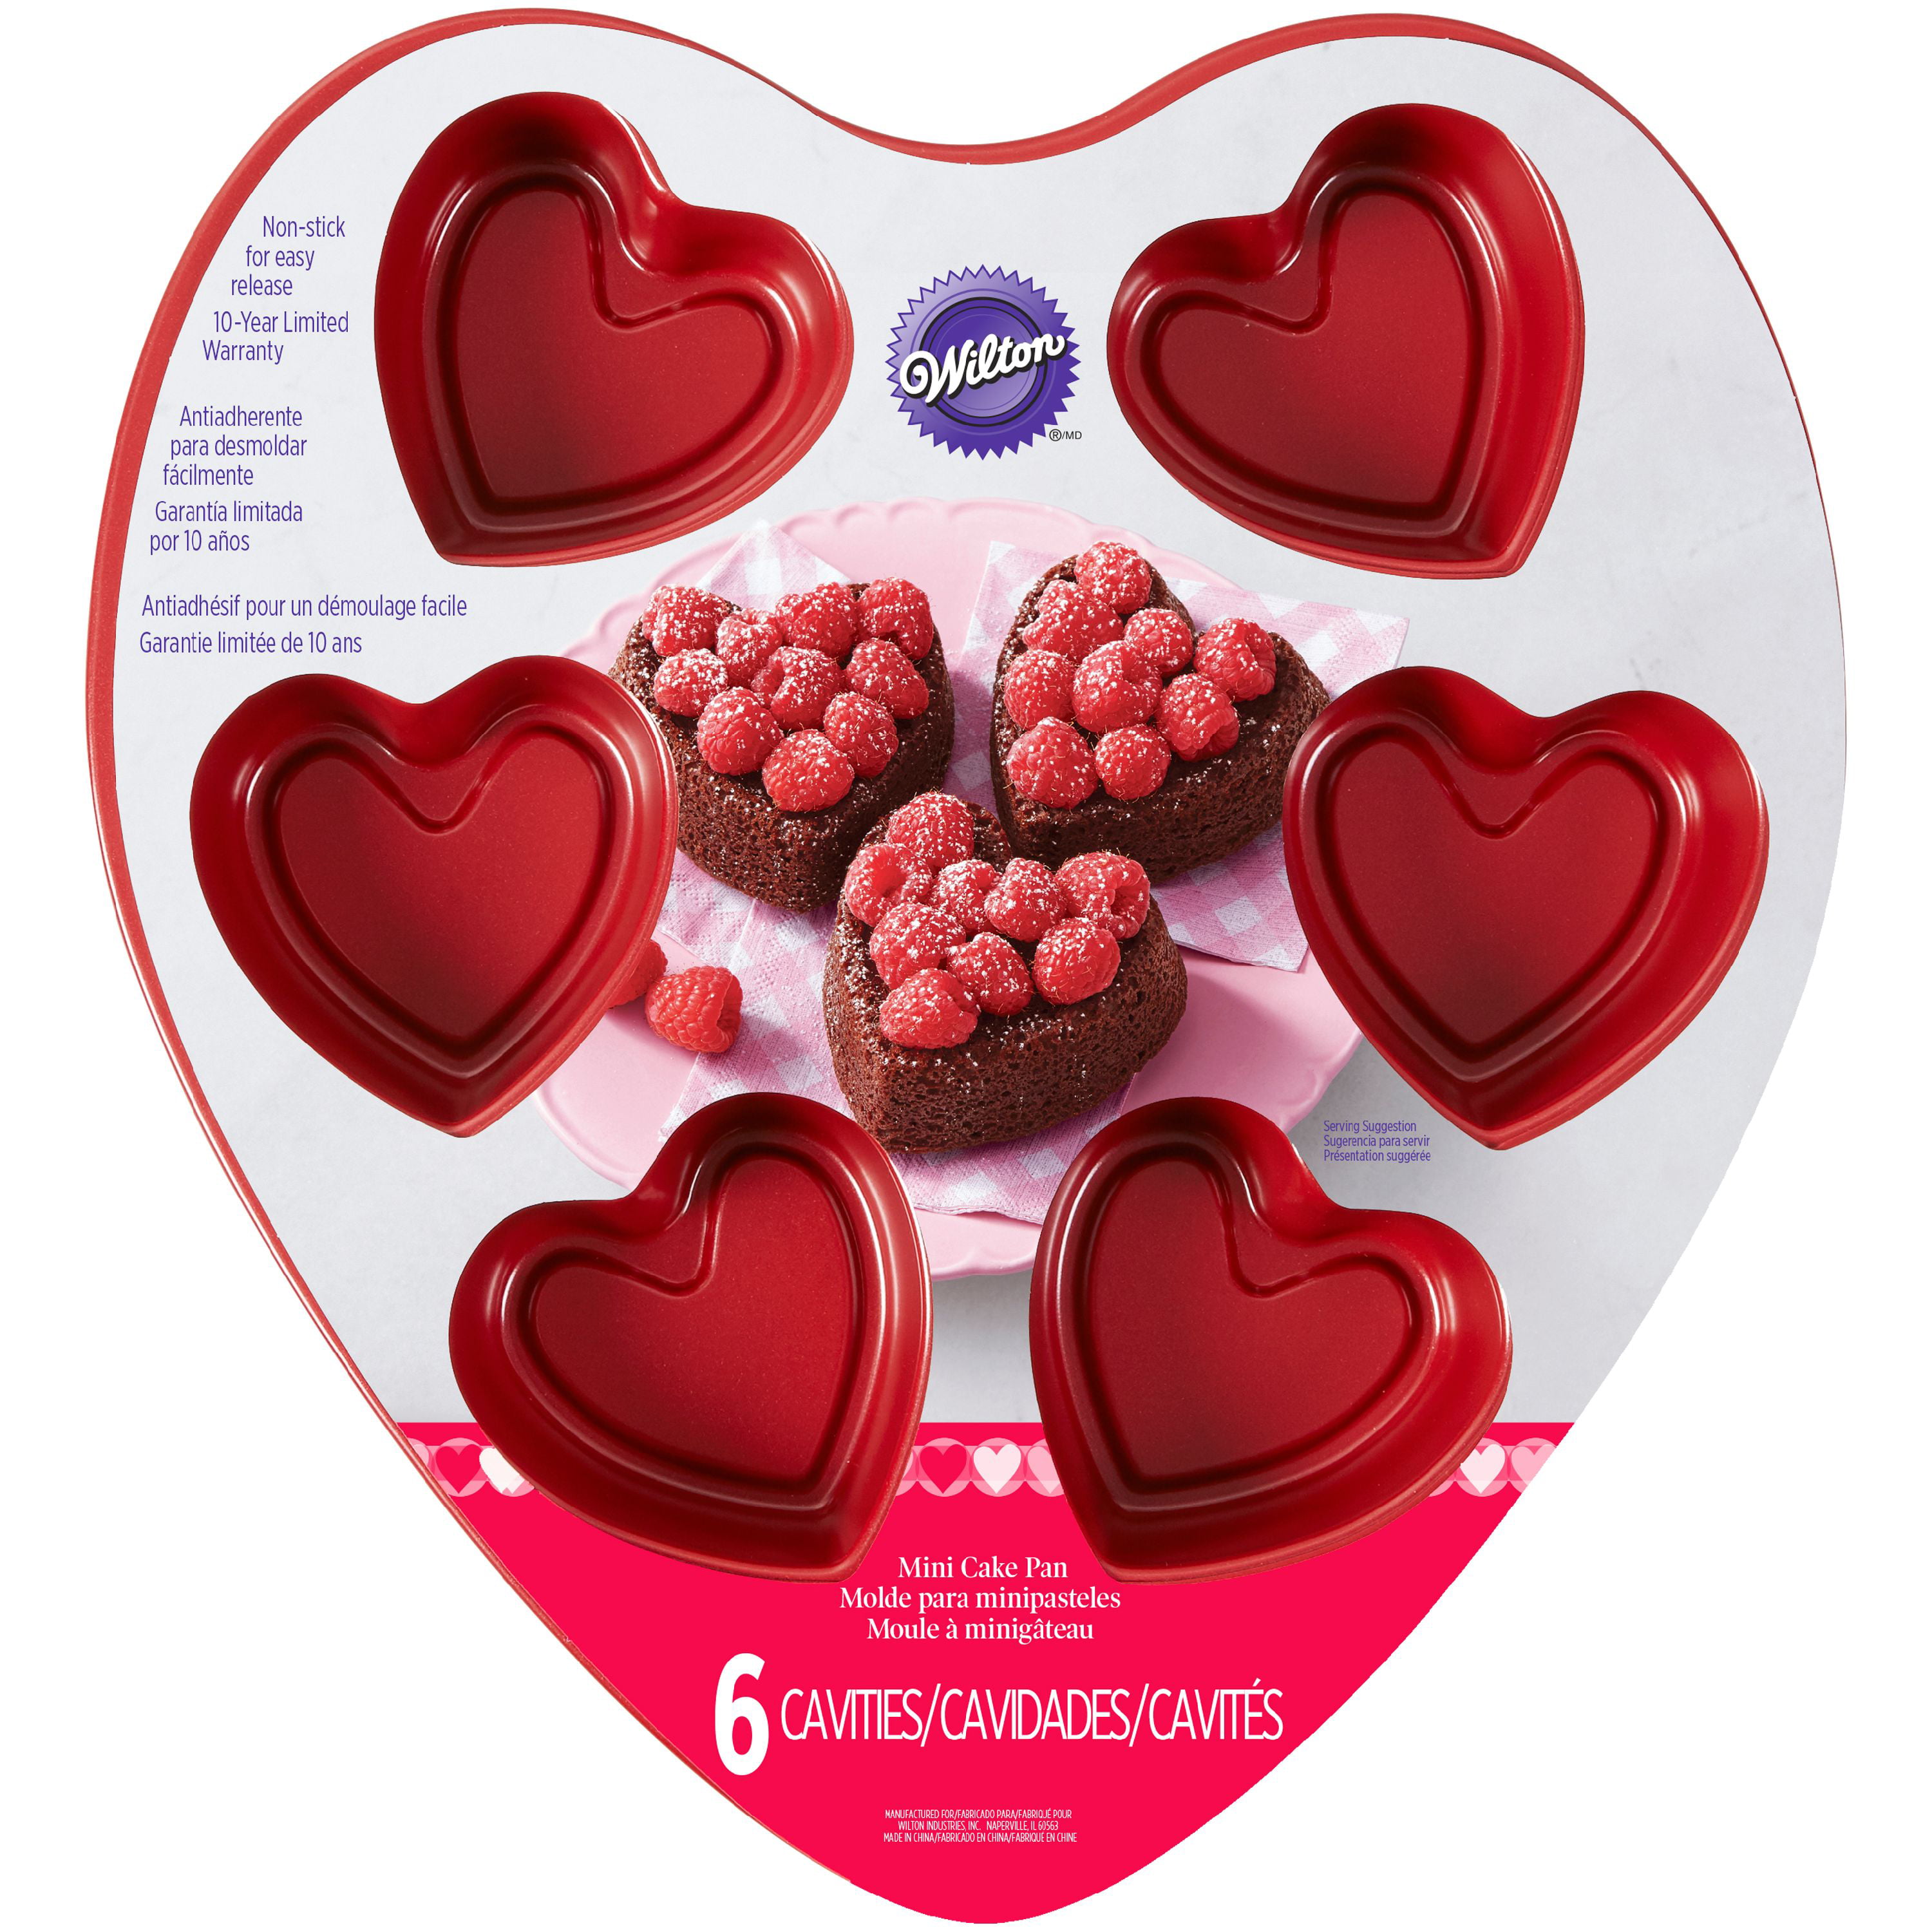 4 VALENTINE'S DAY HEART-SHAPED PERSONAL SIZED BAKING PANS MAKE INDIVIDUAL CAKES 